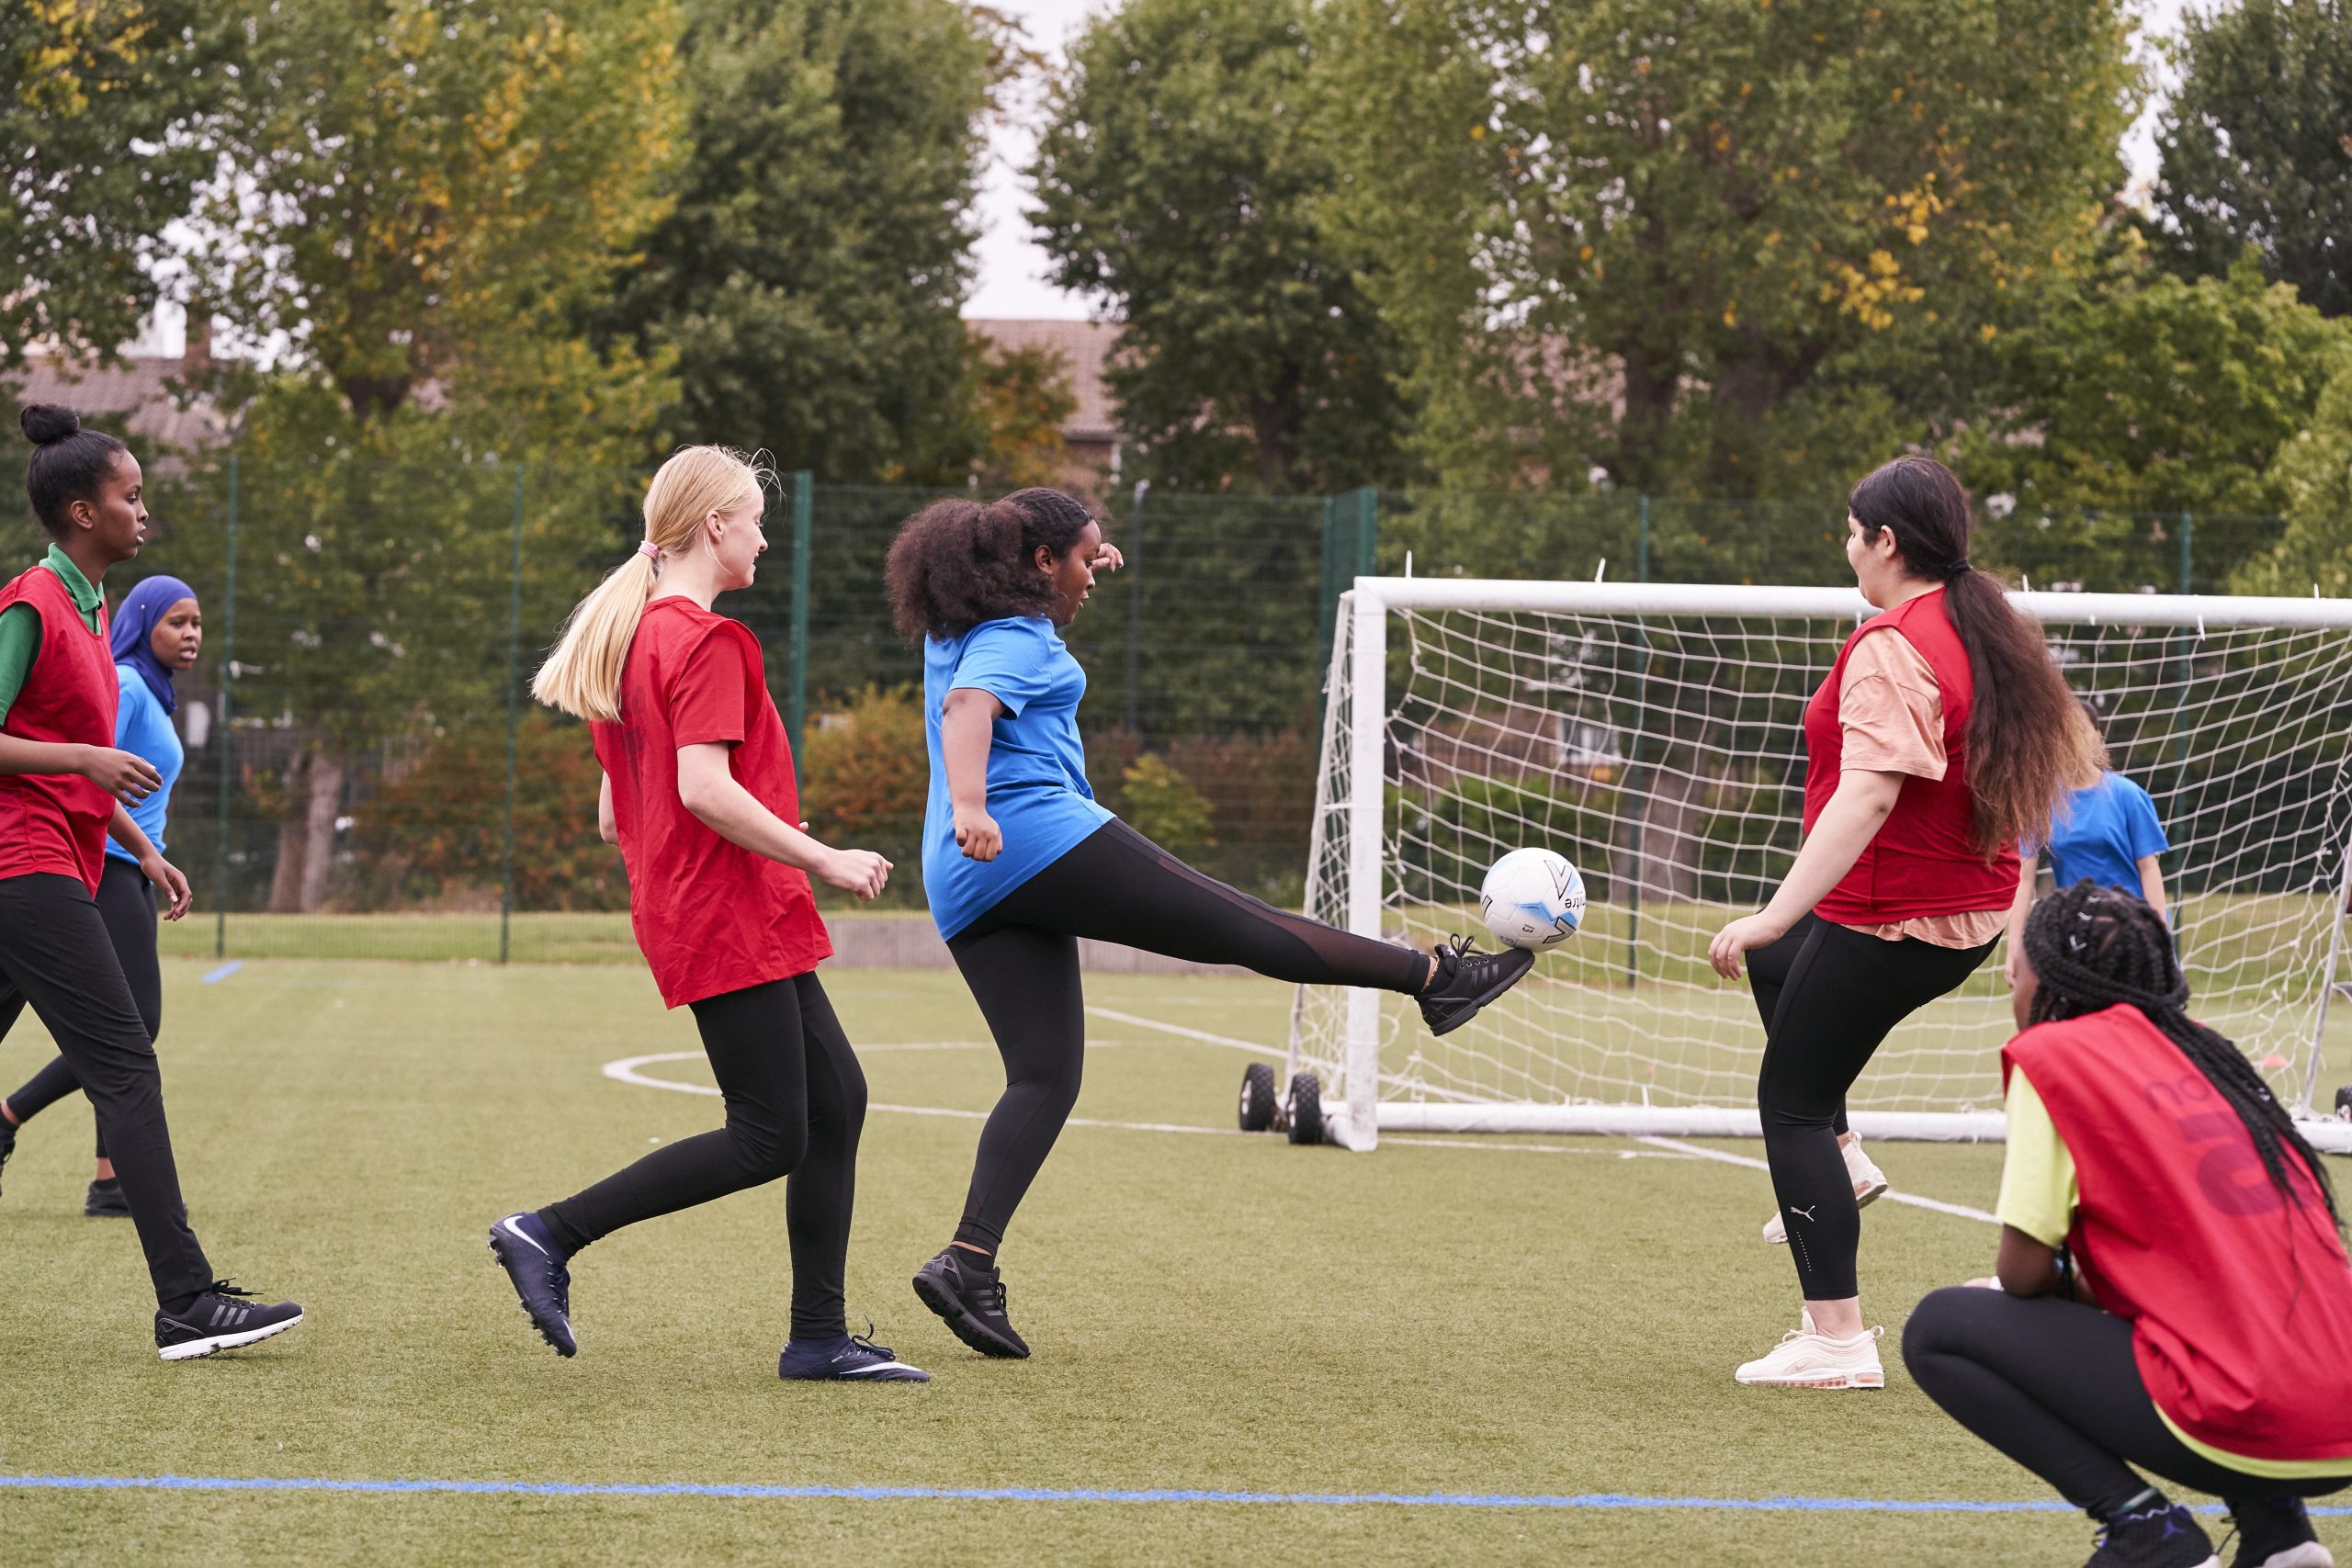 A group of girls playing football at school